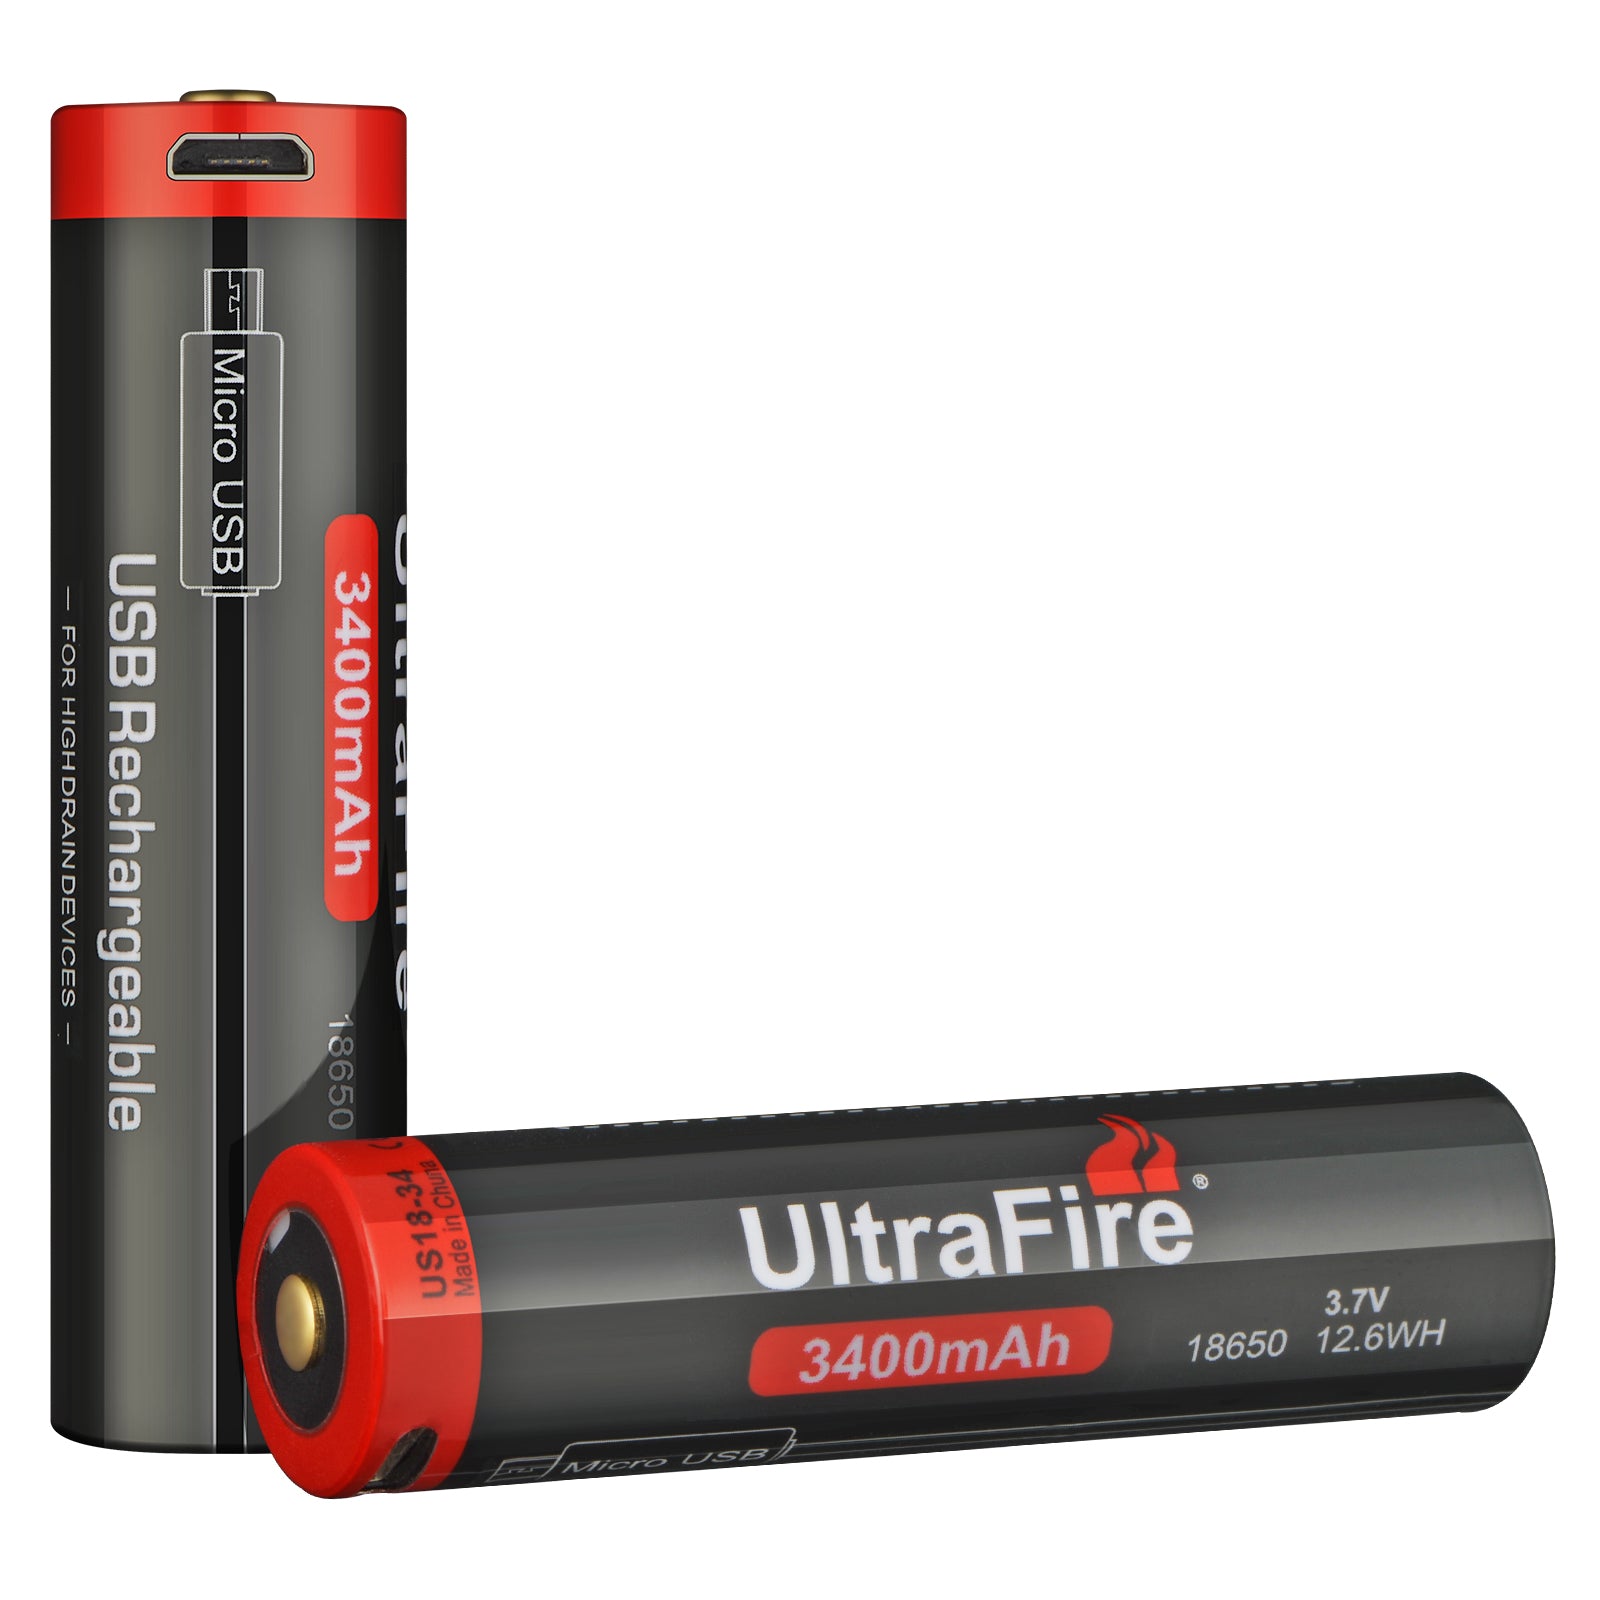 UltraFire 3400mAh 3.7V 18650 USB Rechargeable Lithium Battery with Pro